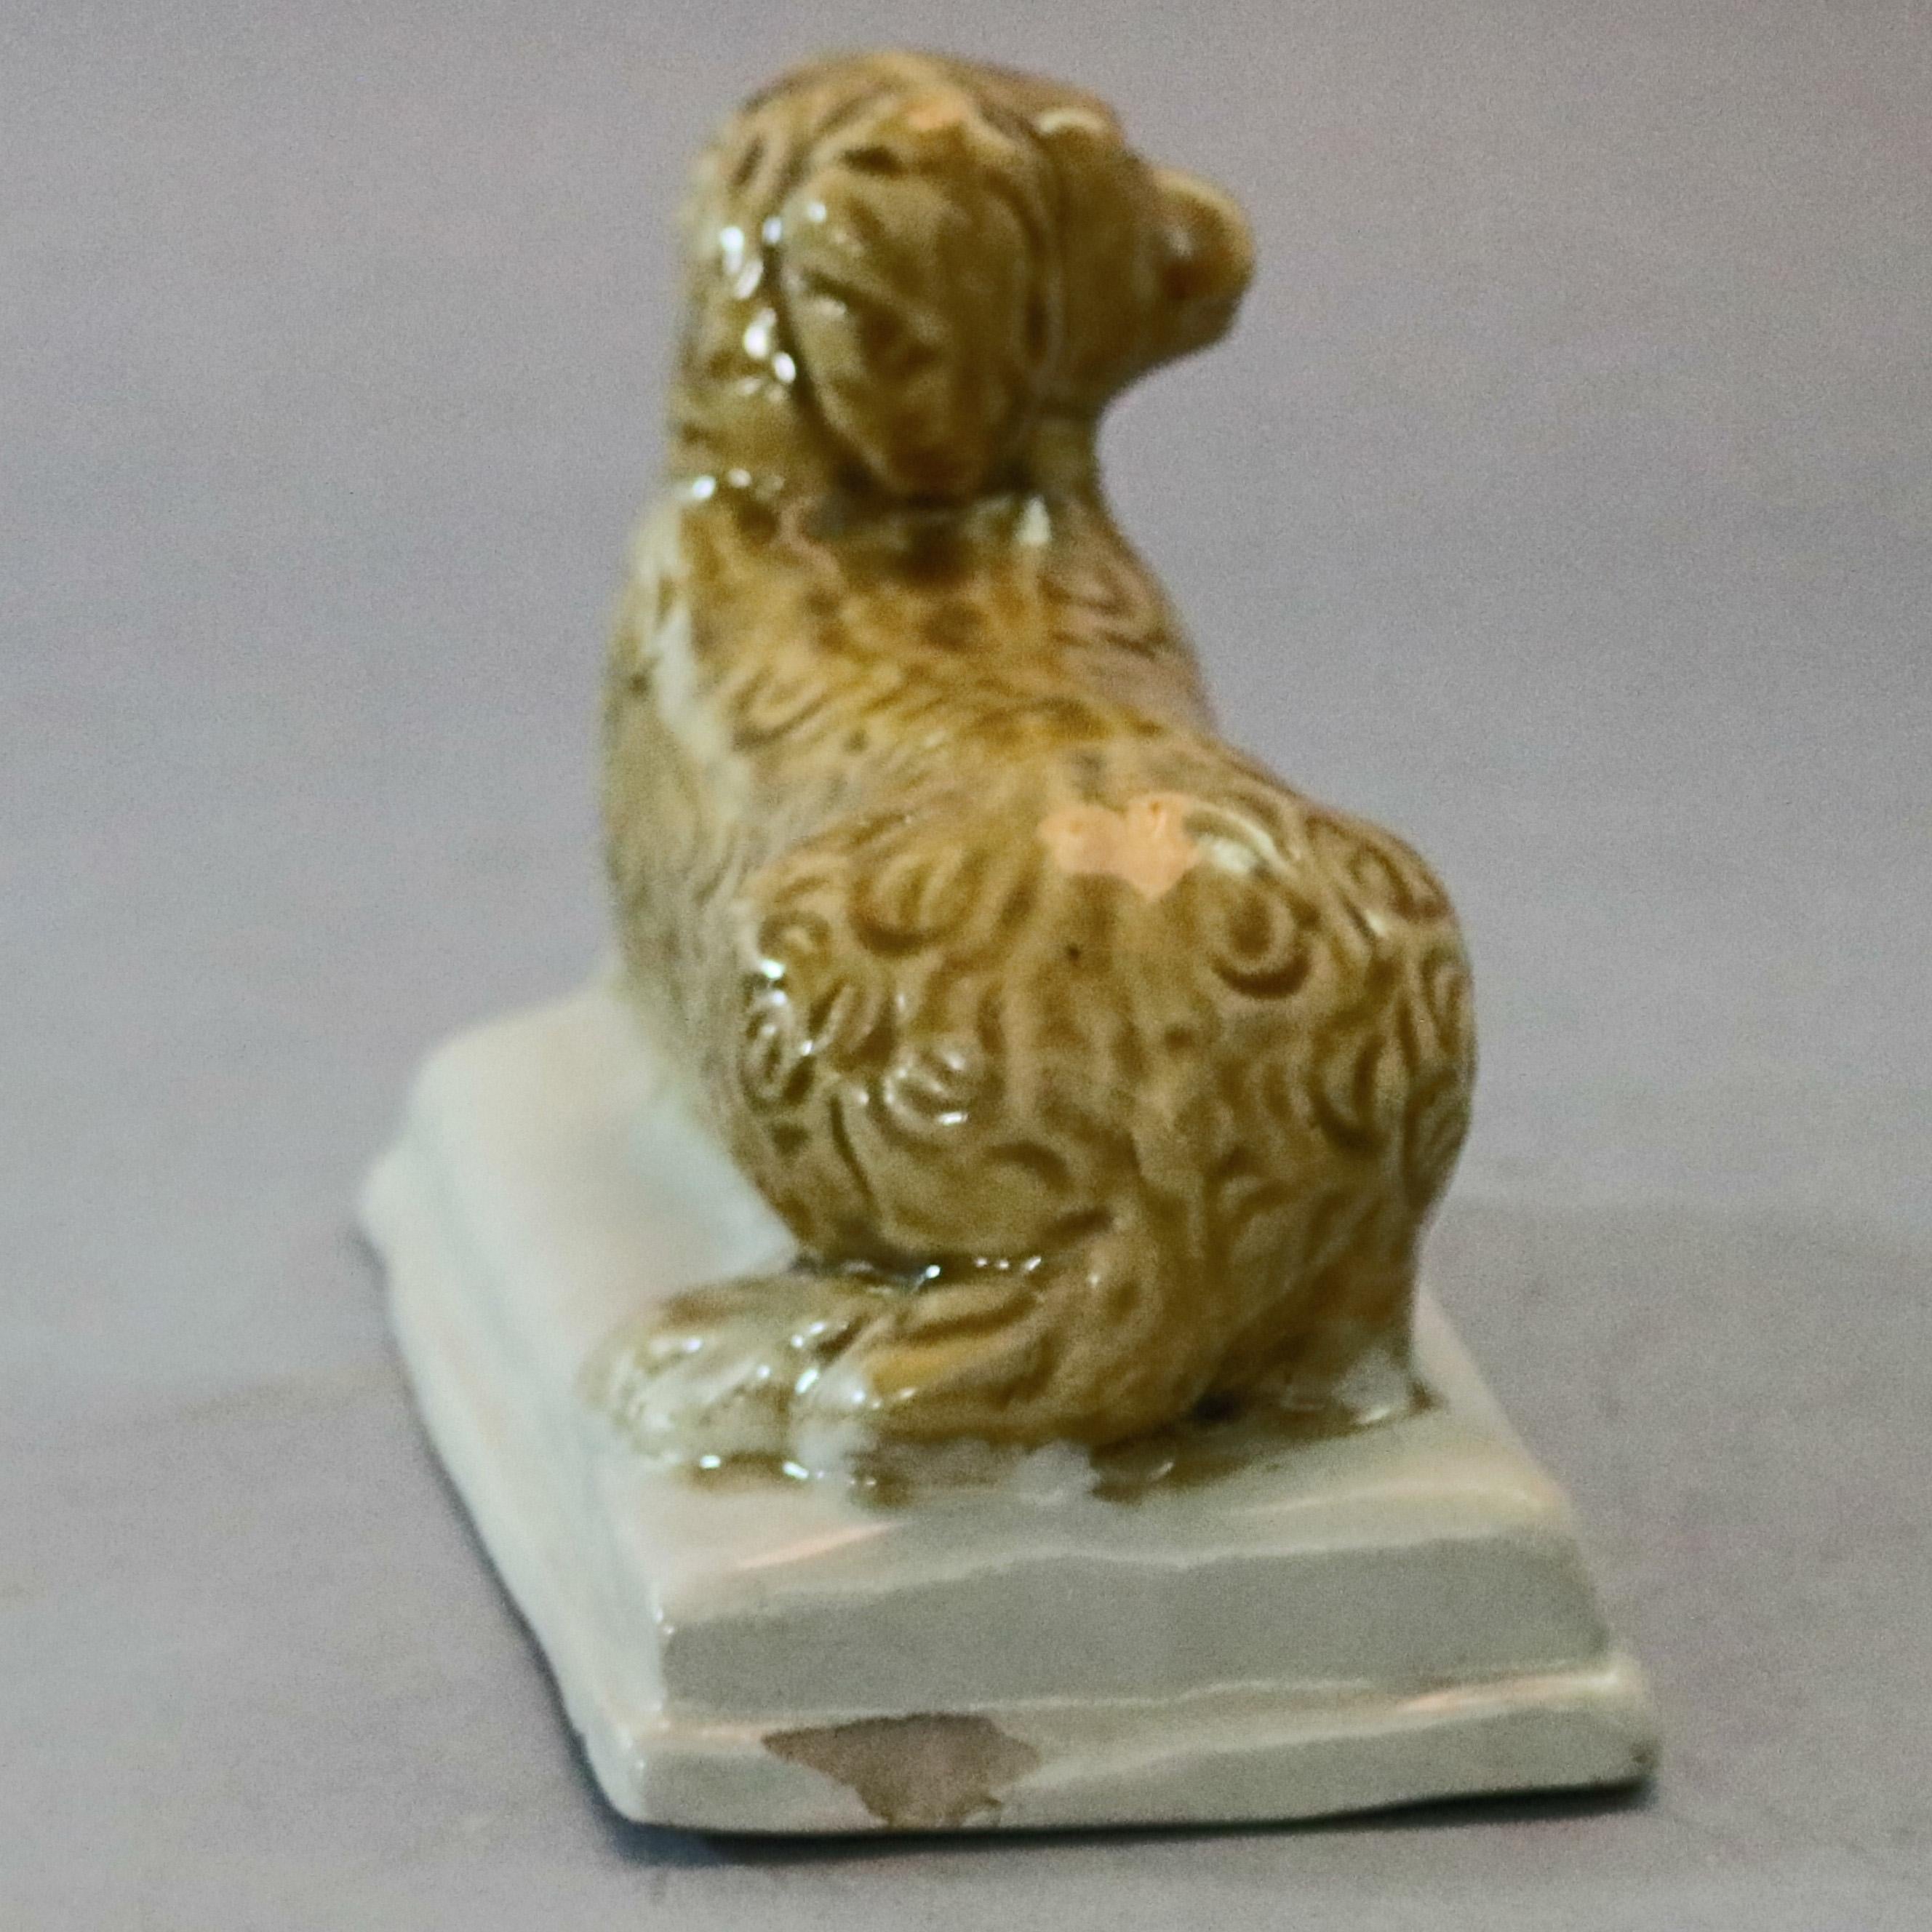 Glazed Antique Early Figural Stoneware Sculpture of Dog, circa 1850